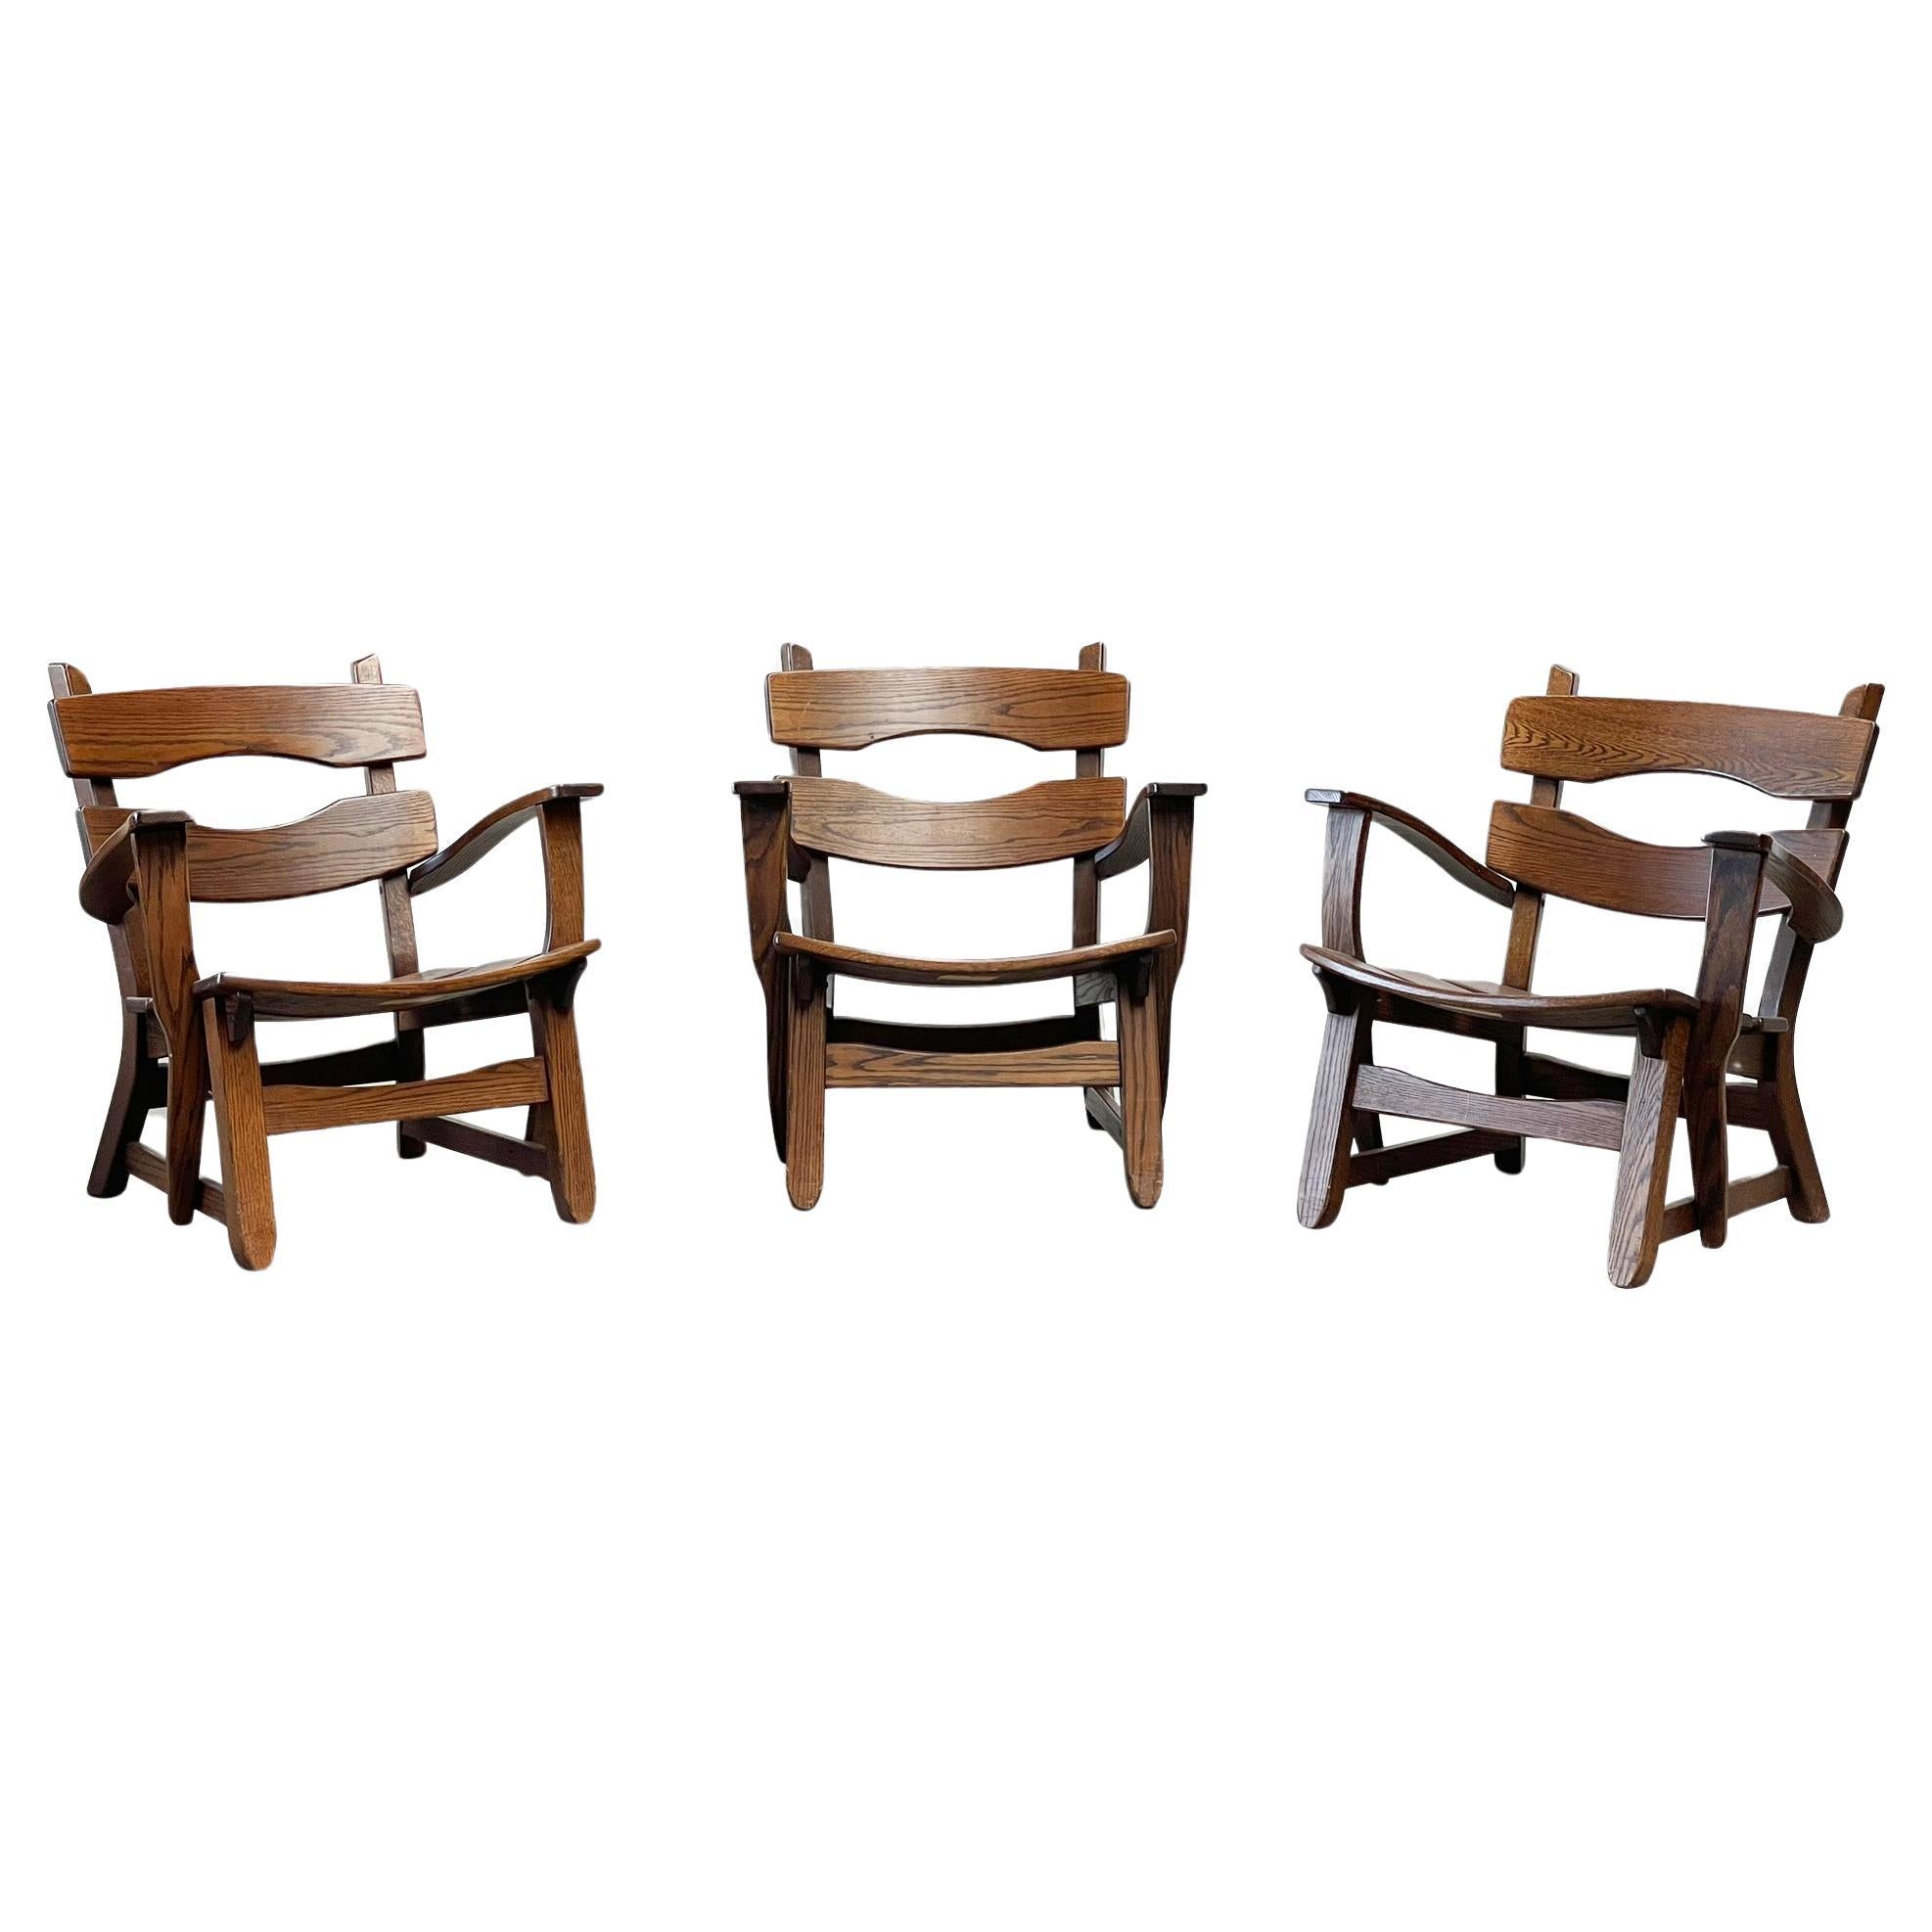 Rare wooden lounge Chairs from Dittmann & co